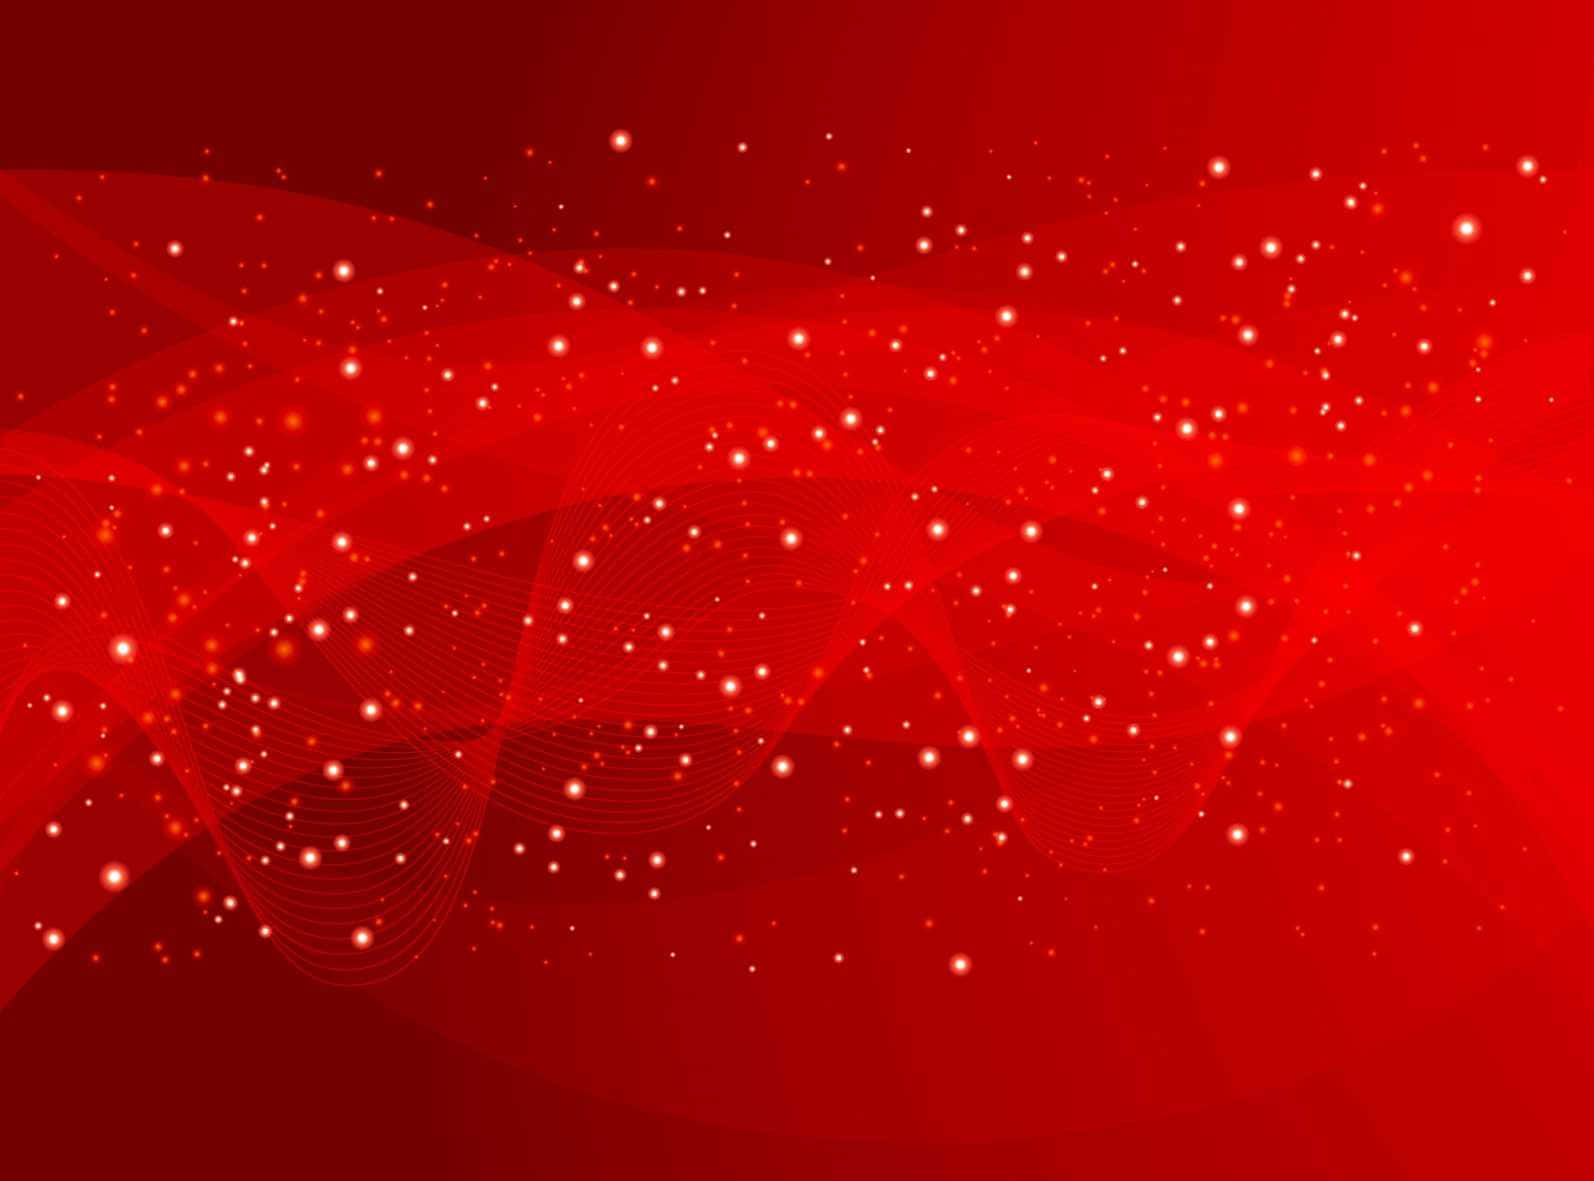 Solid Red Magical Background Wallpaper